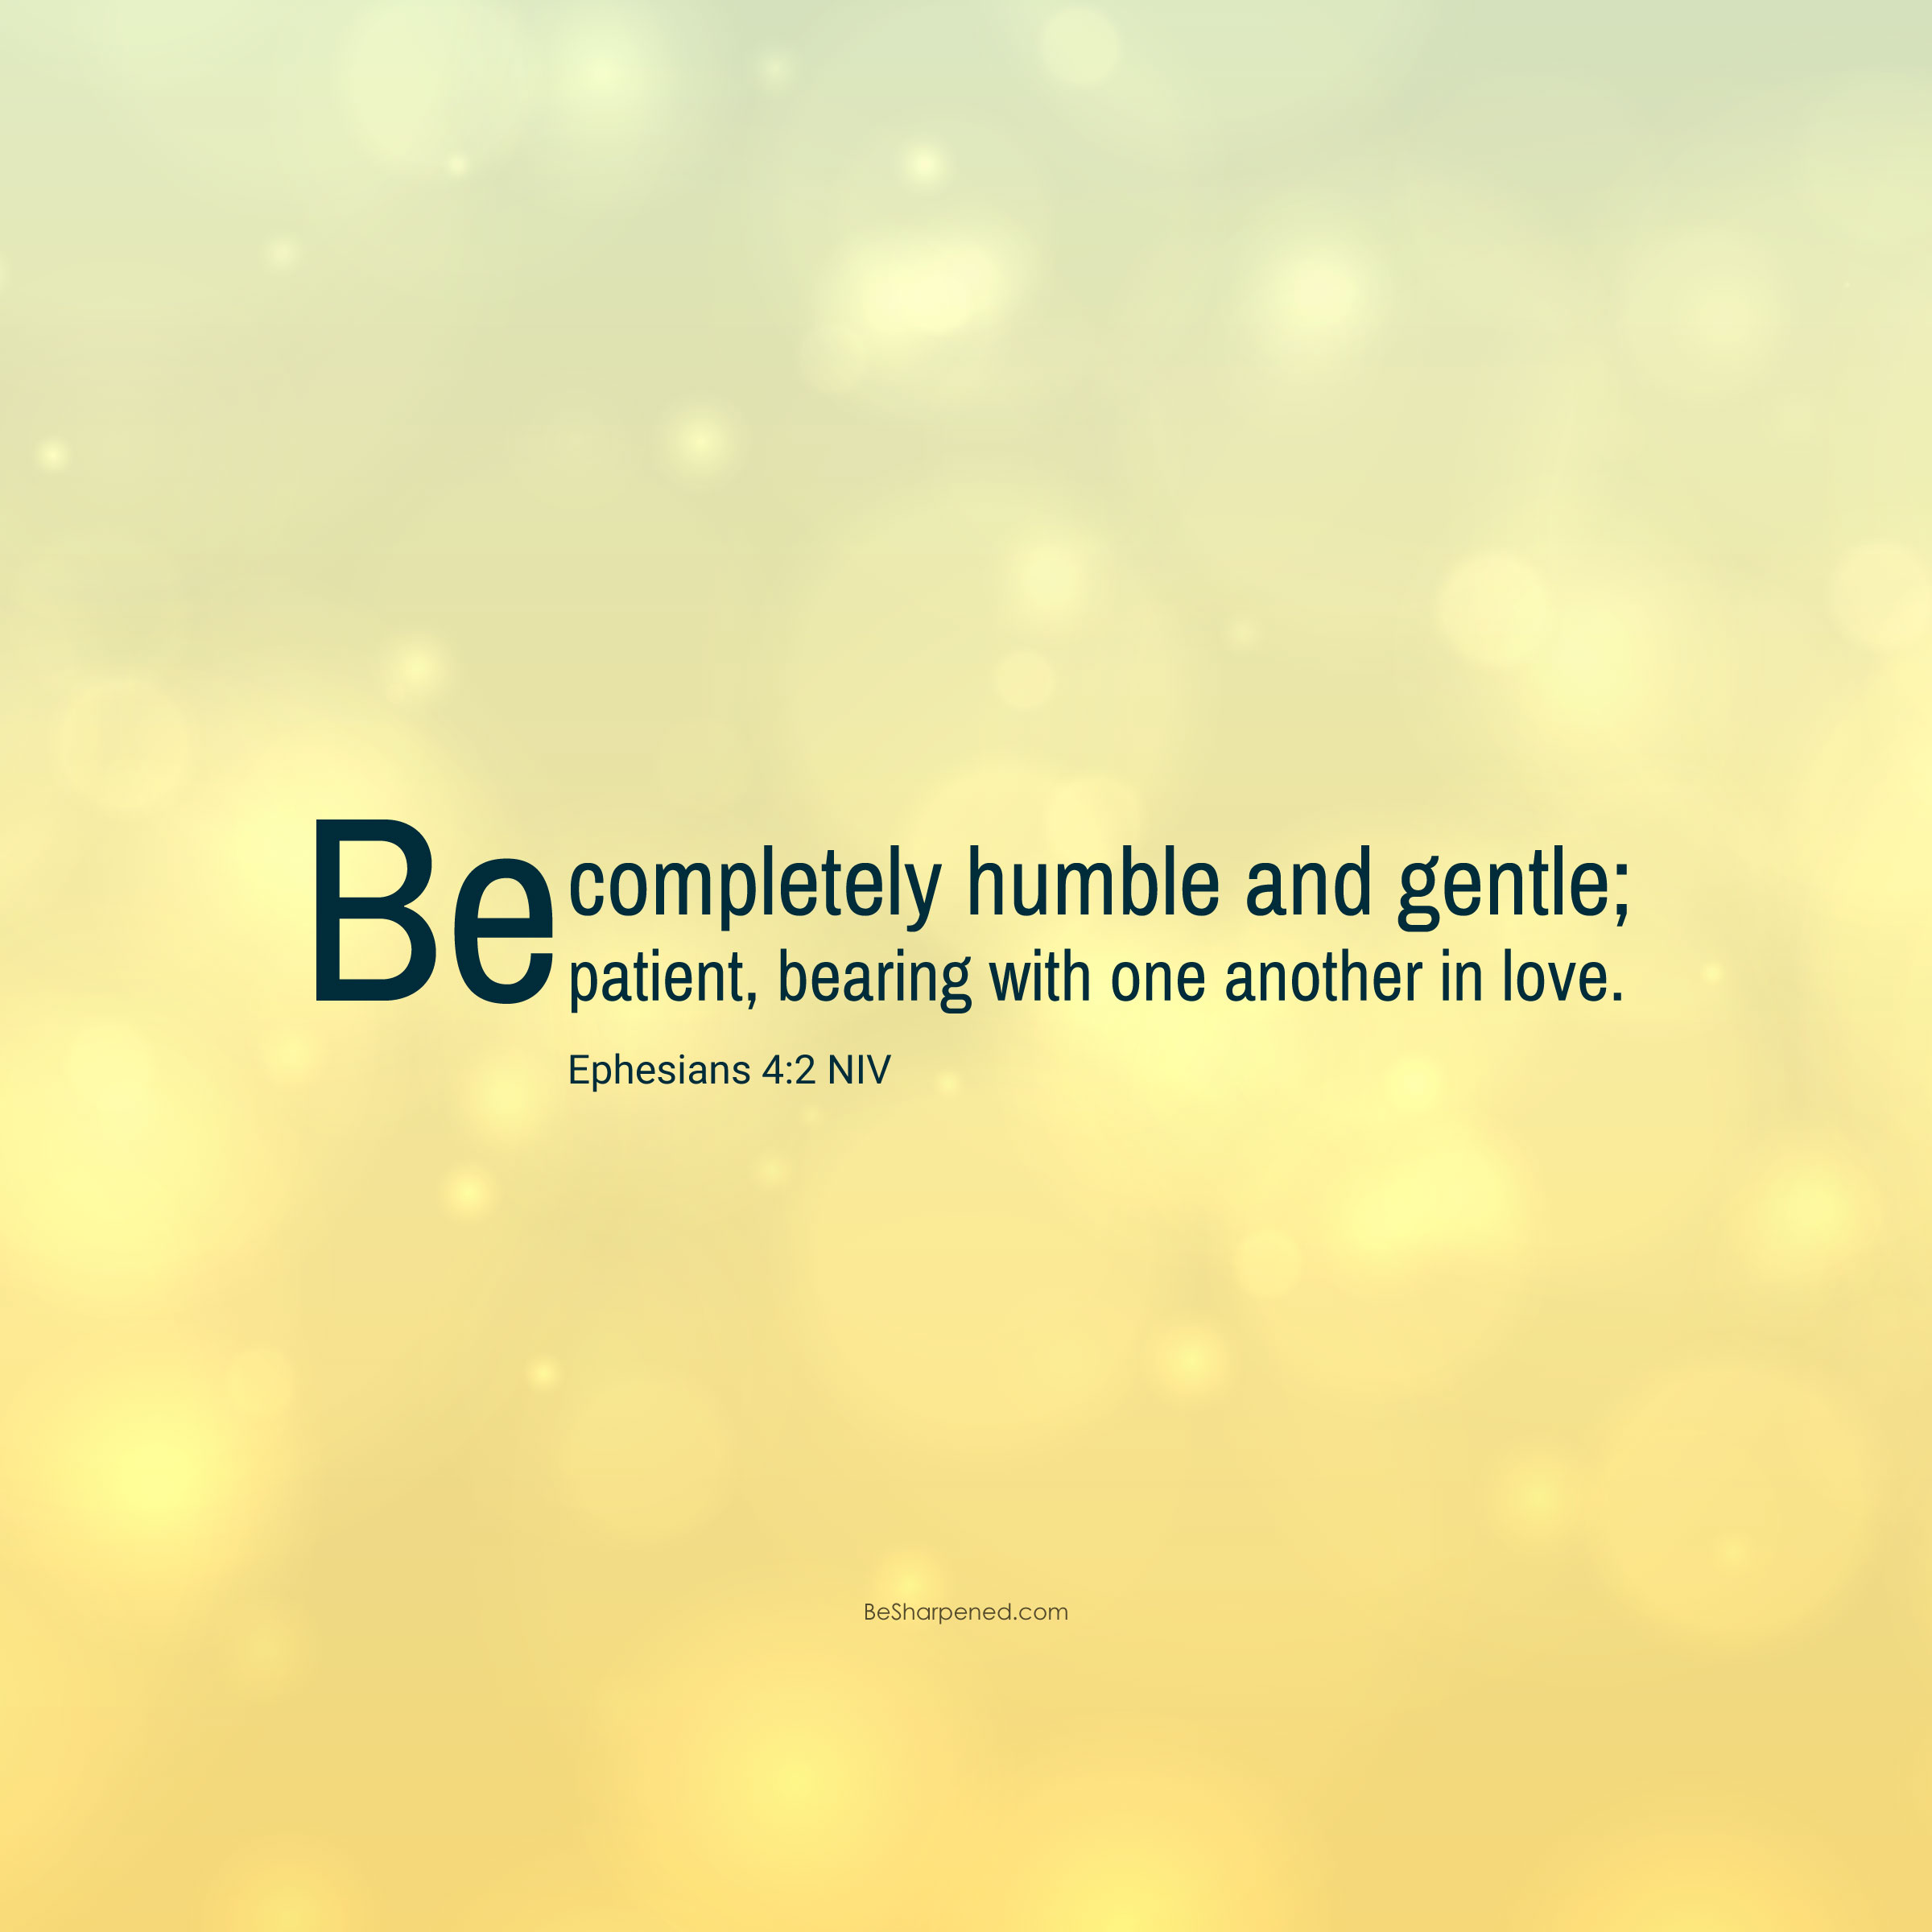 ephesians 4:2 - Be Humble, Gentle and Patient